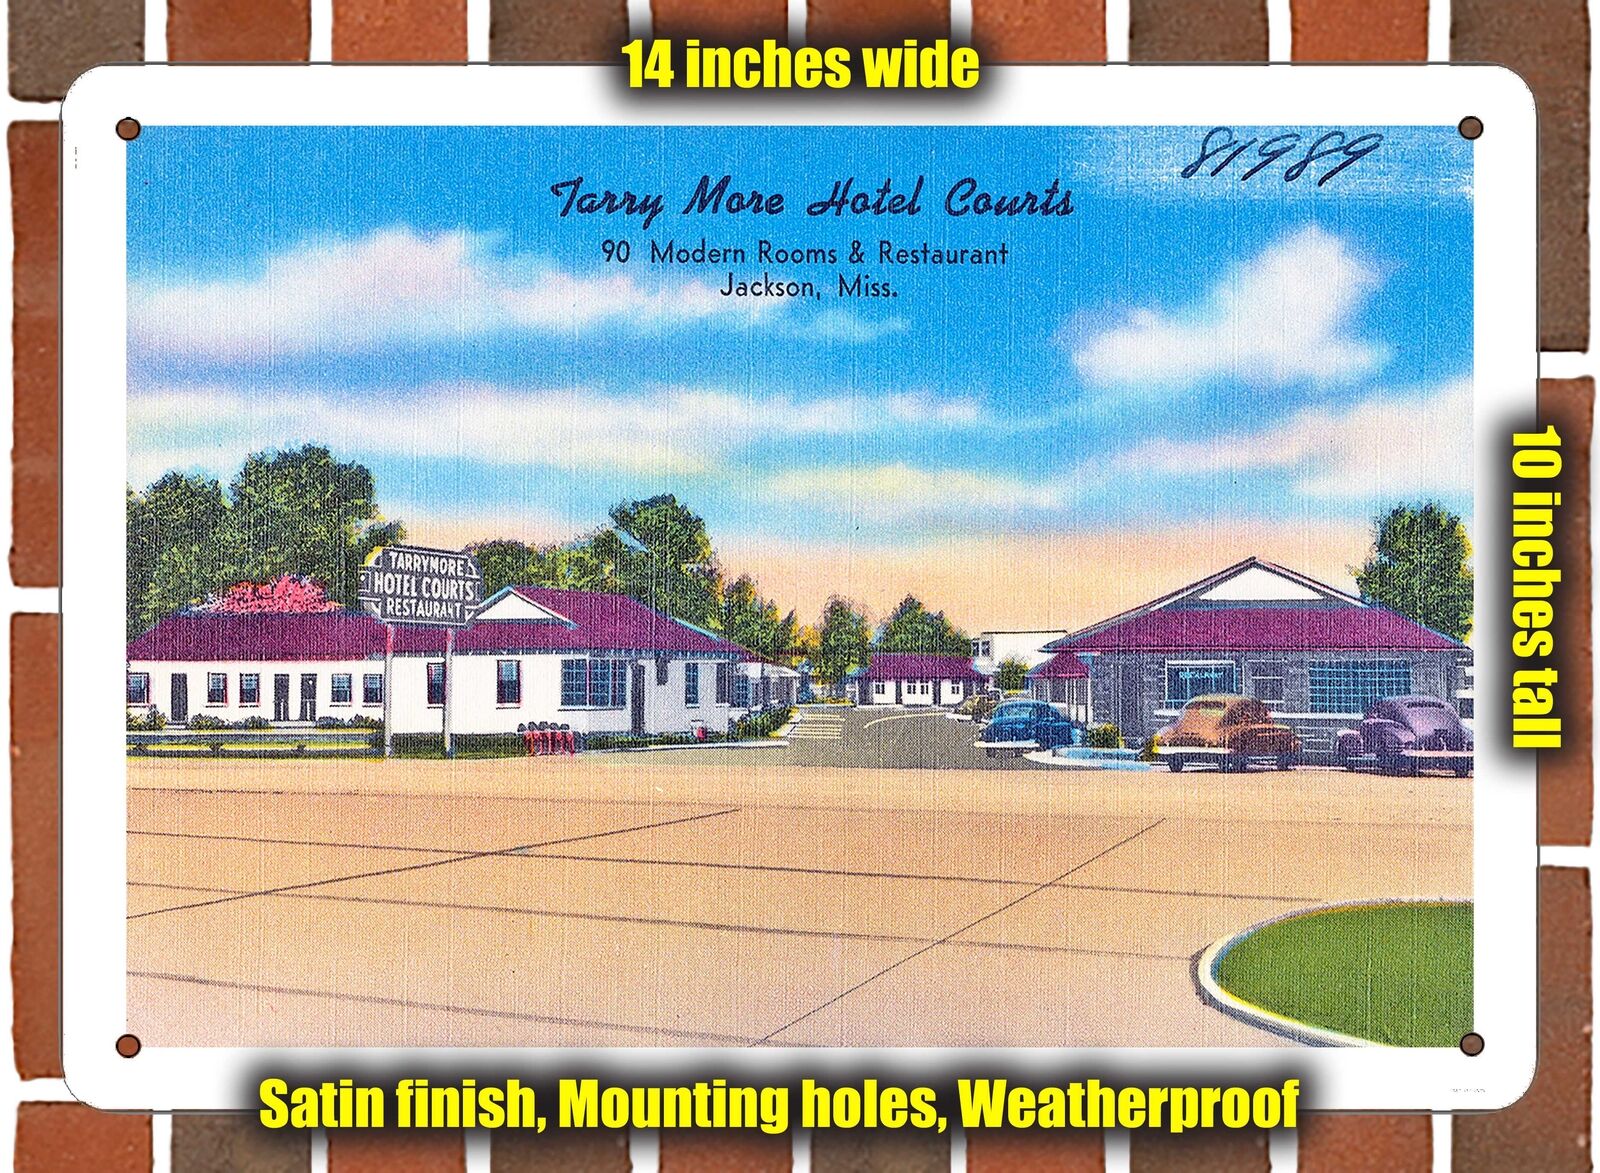 METAL SIGN - Mississippi Postcard - Terry More Hotel Courts, 90 Modern Rooms &